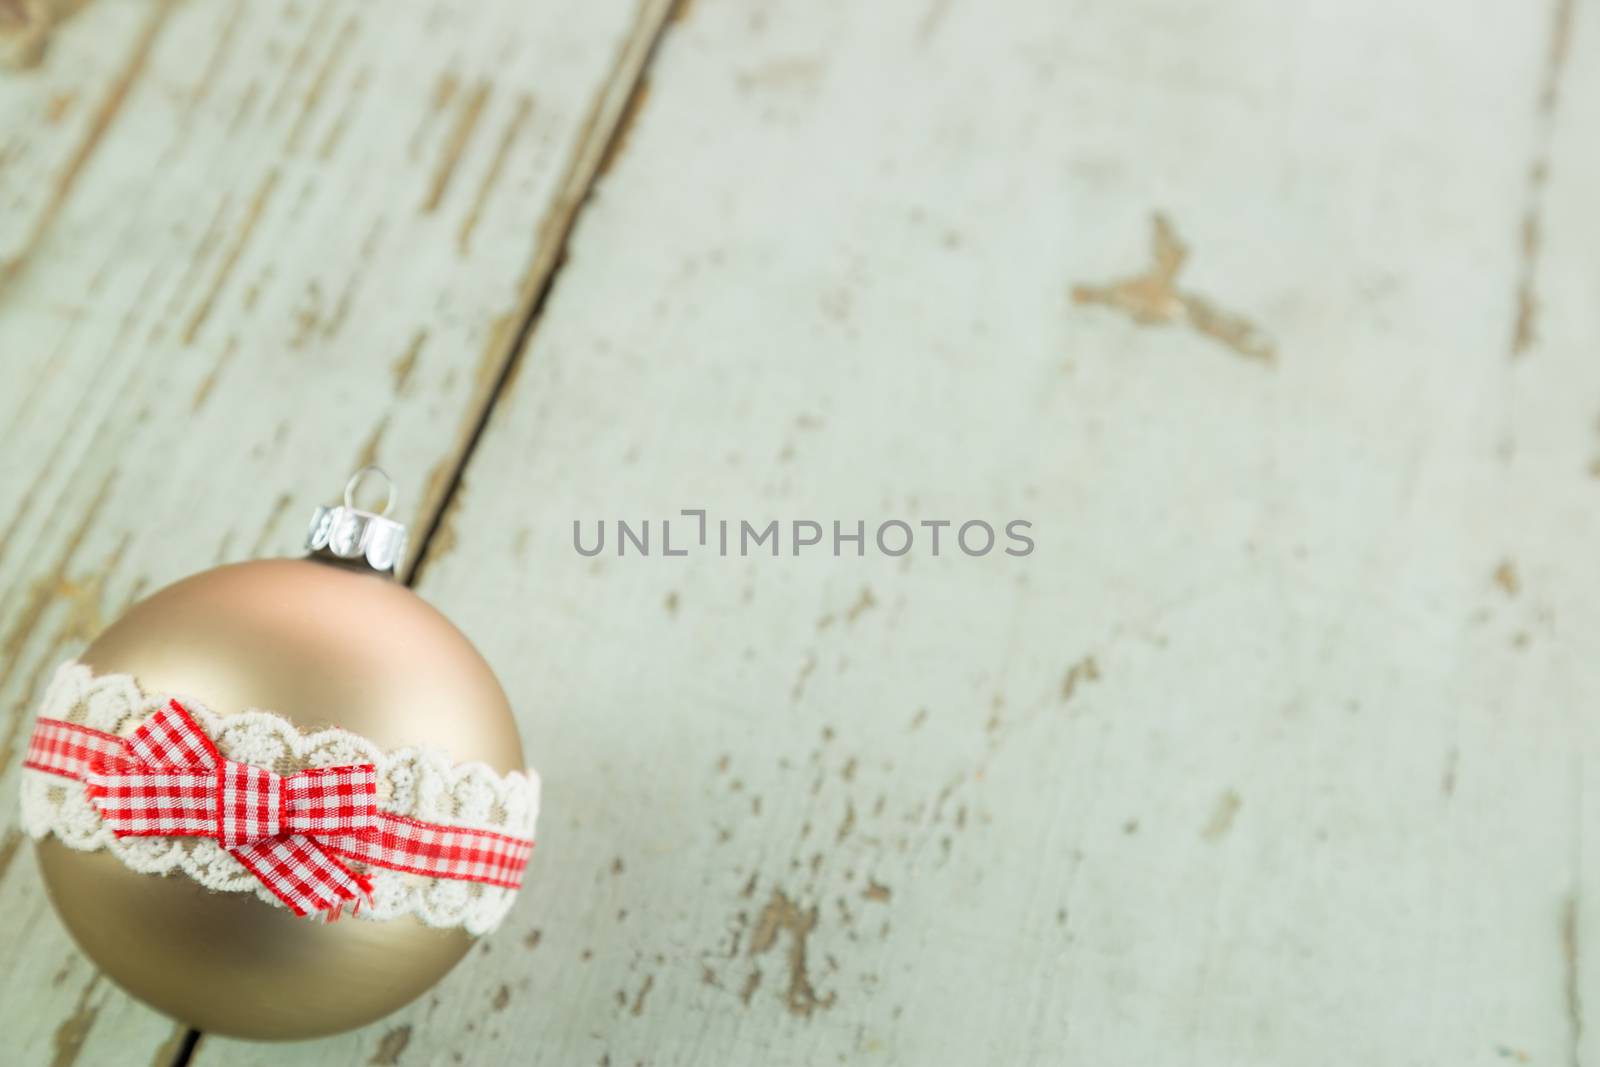 Three colorful decorated Christmas baubles on rustic wood with copy space to celebrate the Xmas holiday season